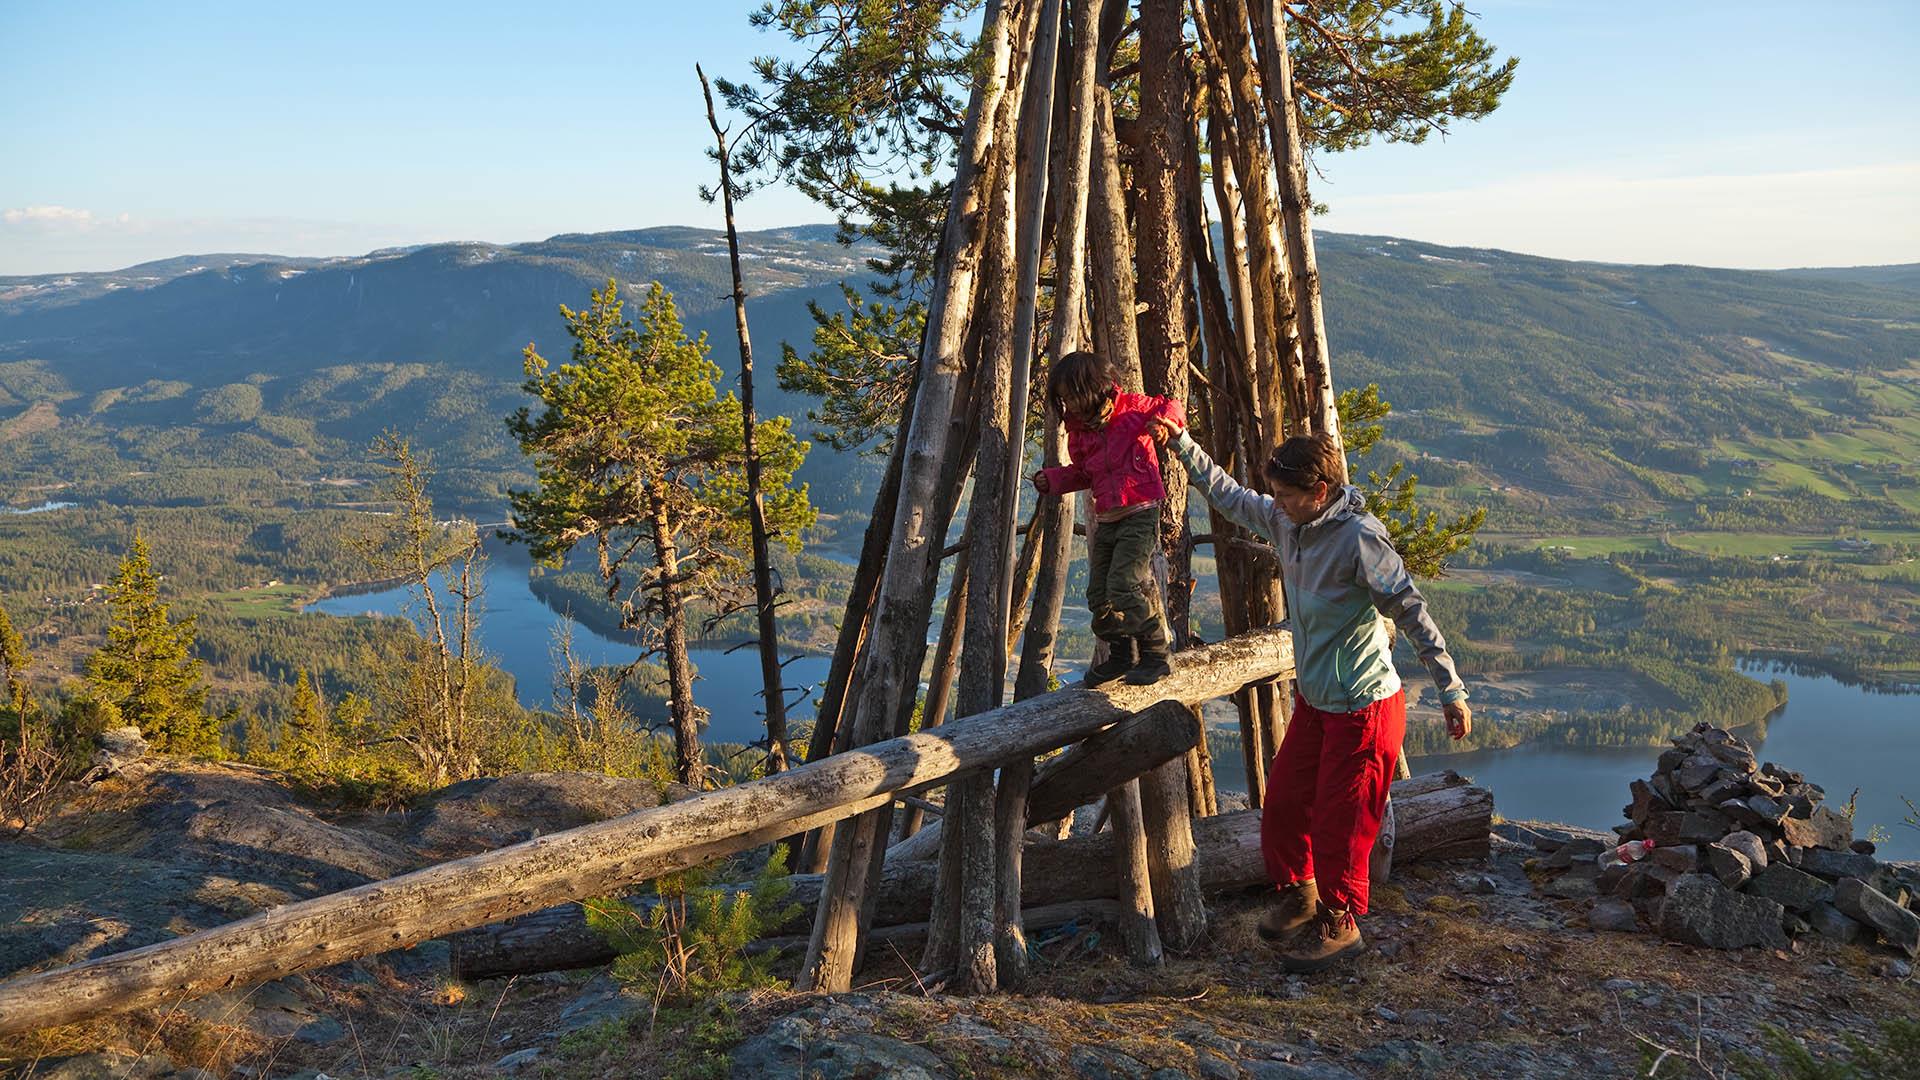 Kid balancing on a timber that has fallen from a beacon on a mountain top, view towards lakes and mountains in the background.